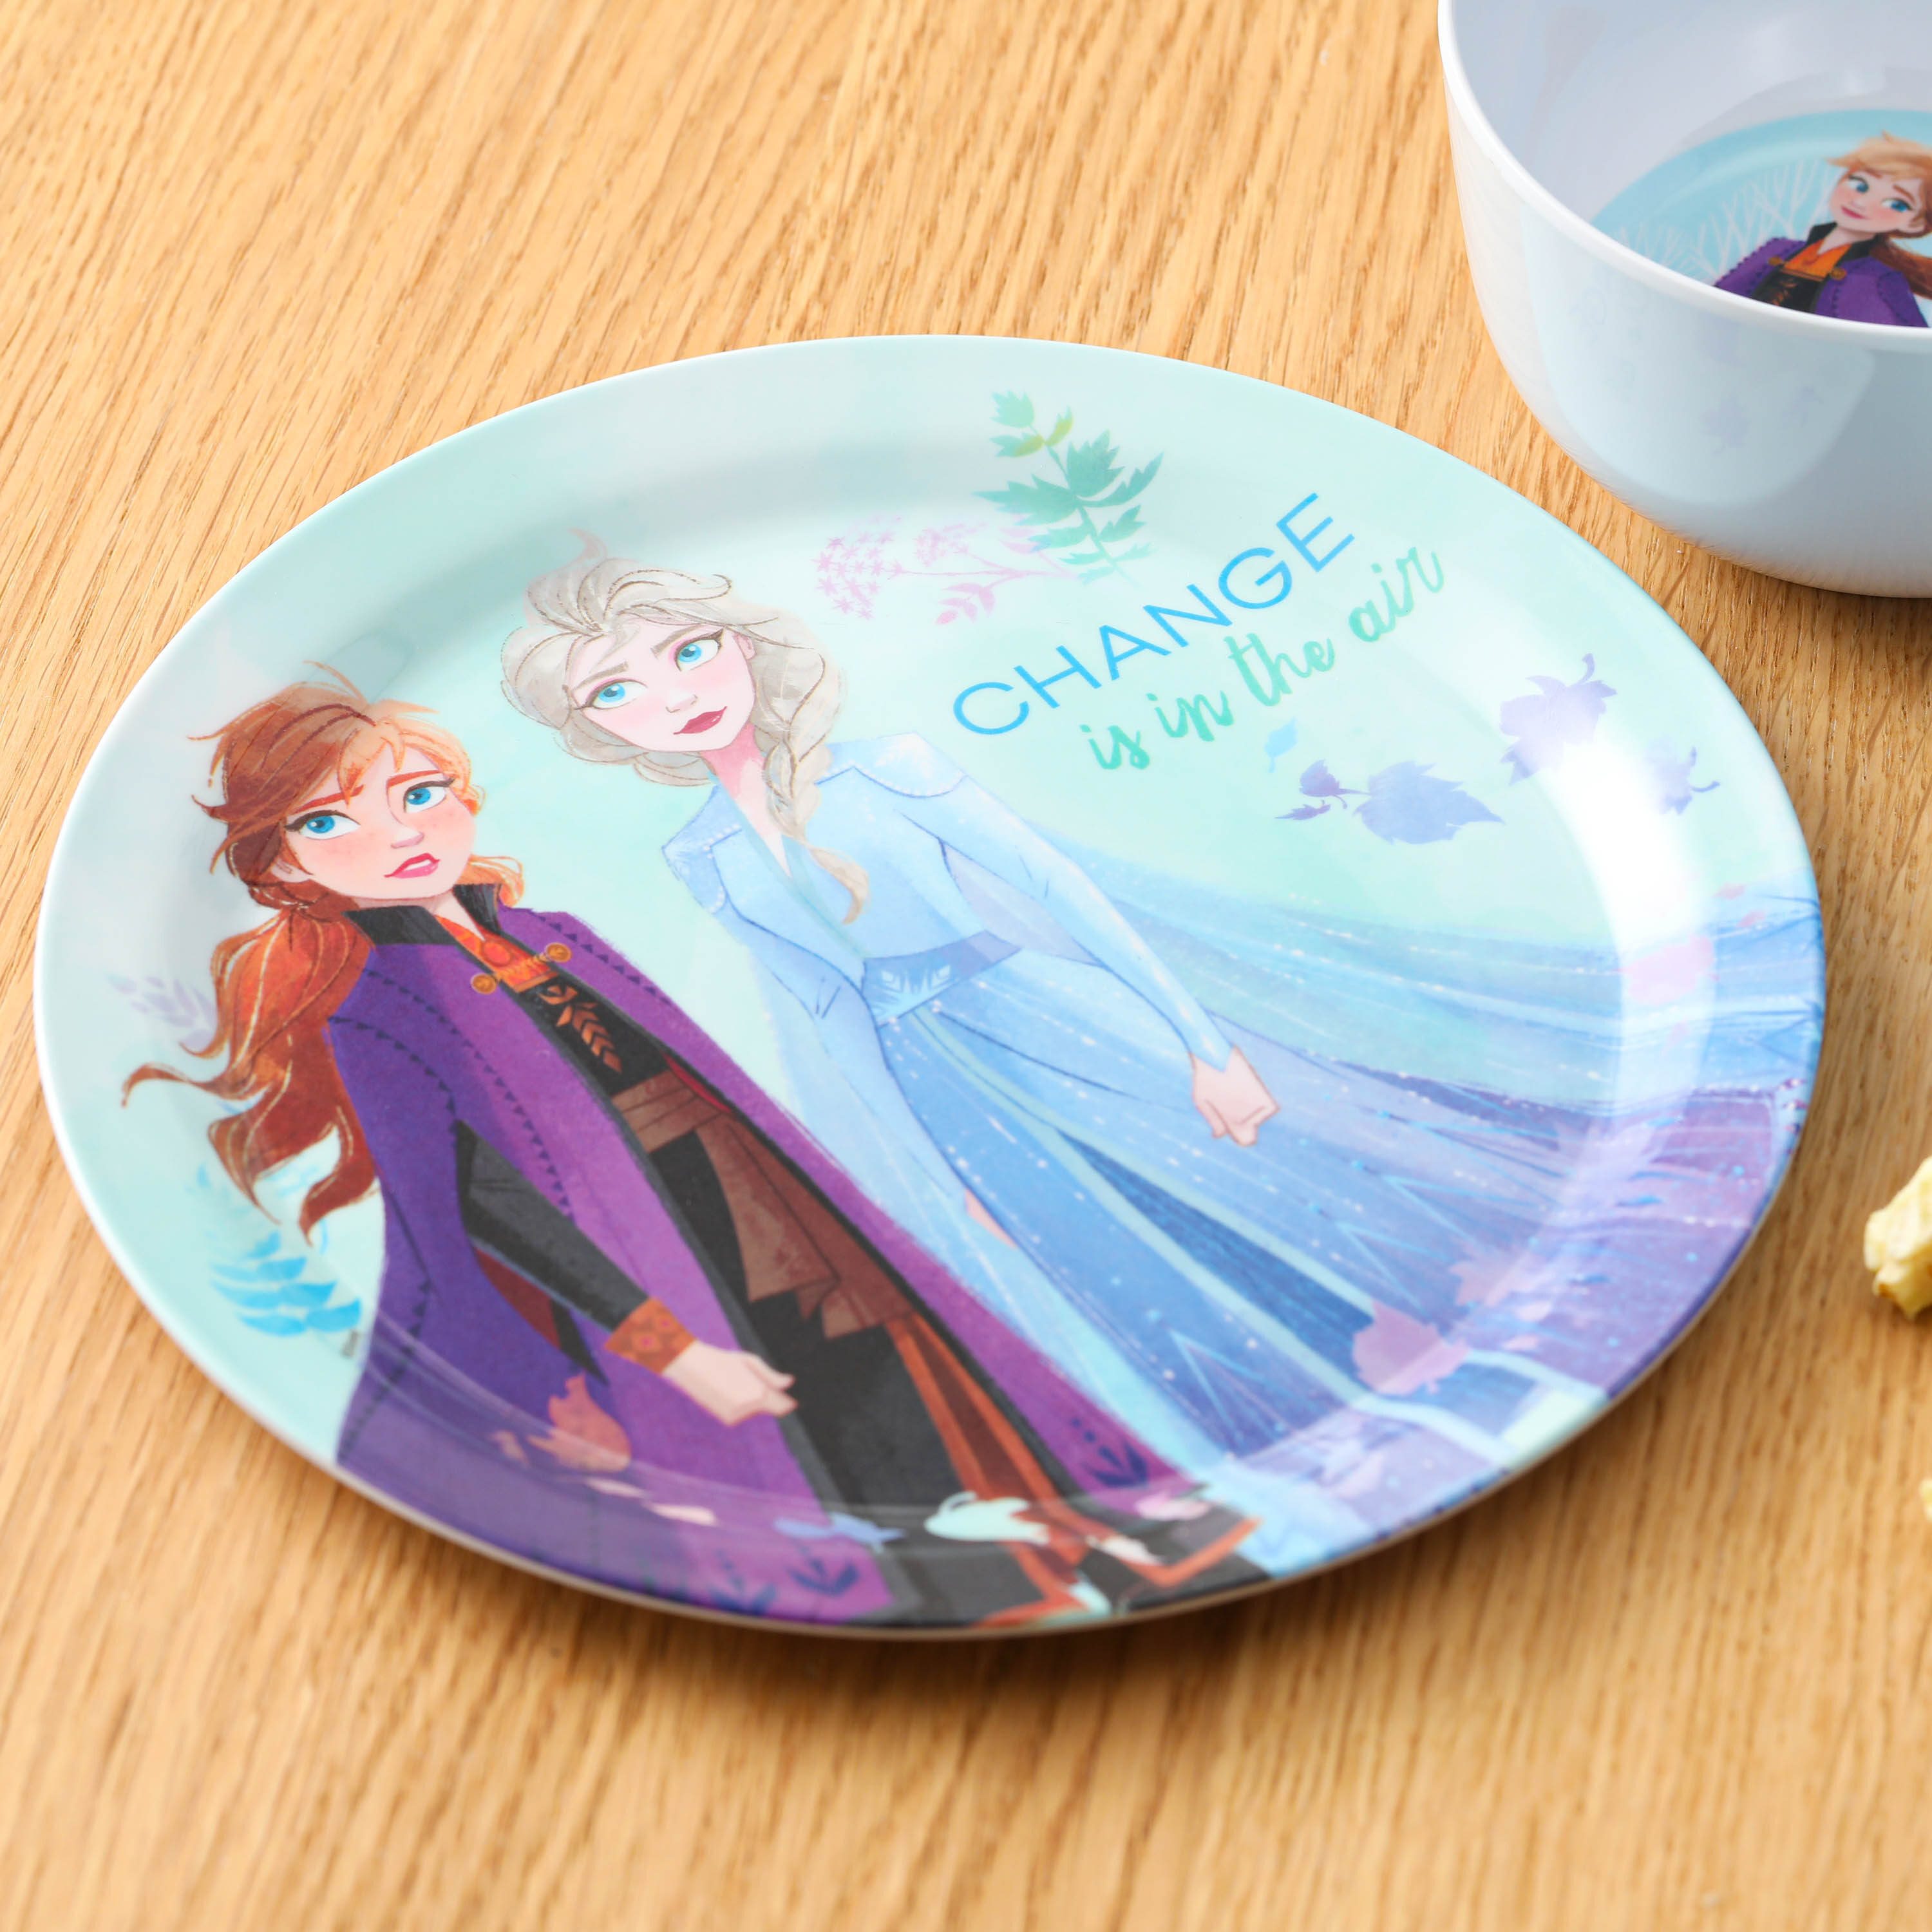 Designs Mealtime Set with Plate Break-resistant and BPA-free plastic Zak 3 Piece Set Bowl and Tumbler featuring Olaf & Sven from Frozen 